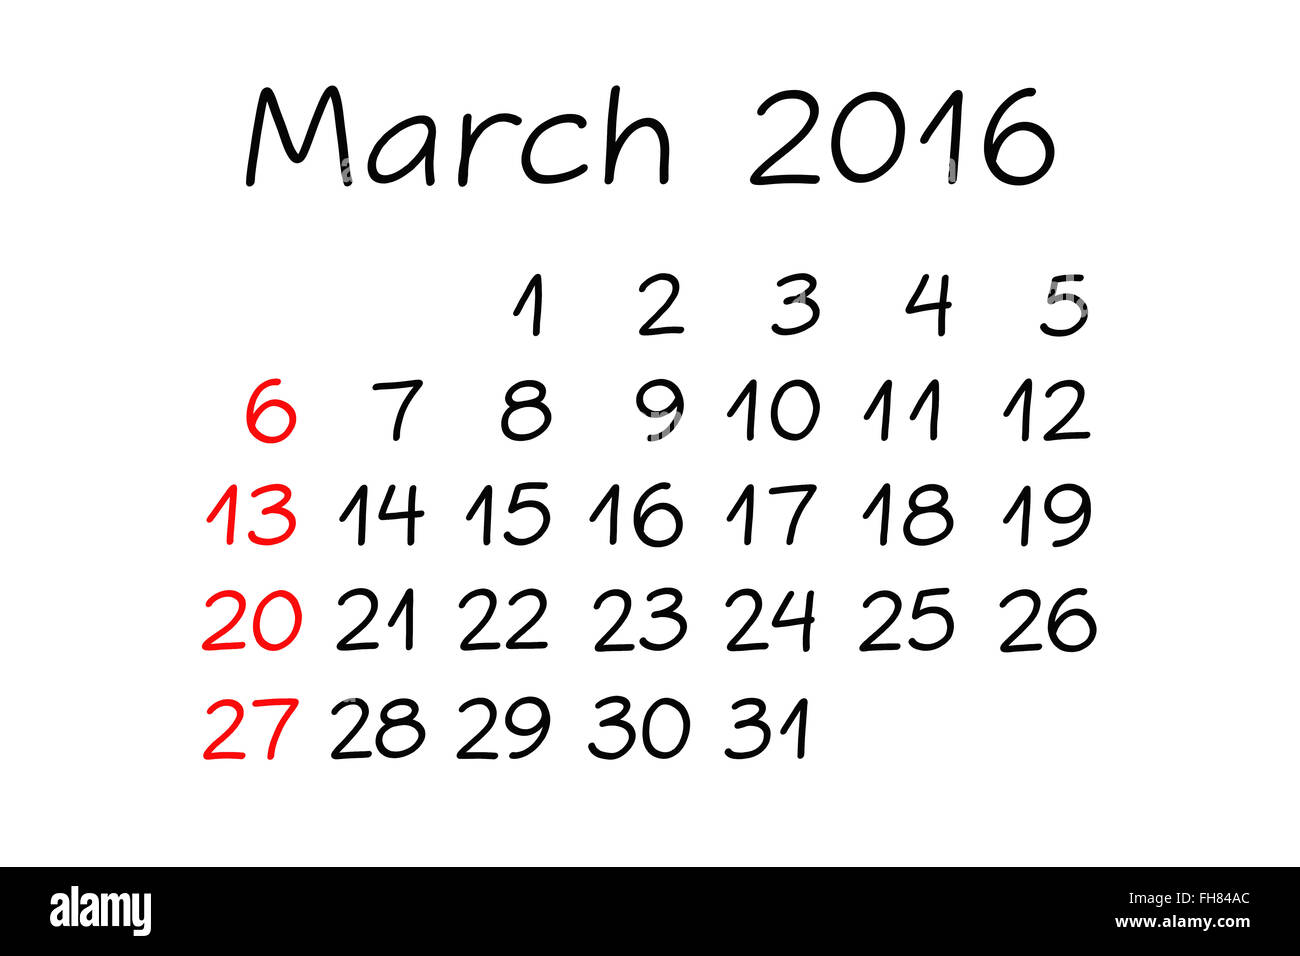 March, 2016